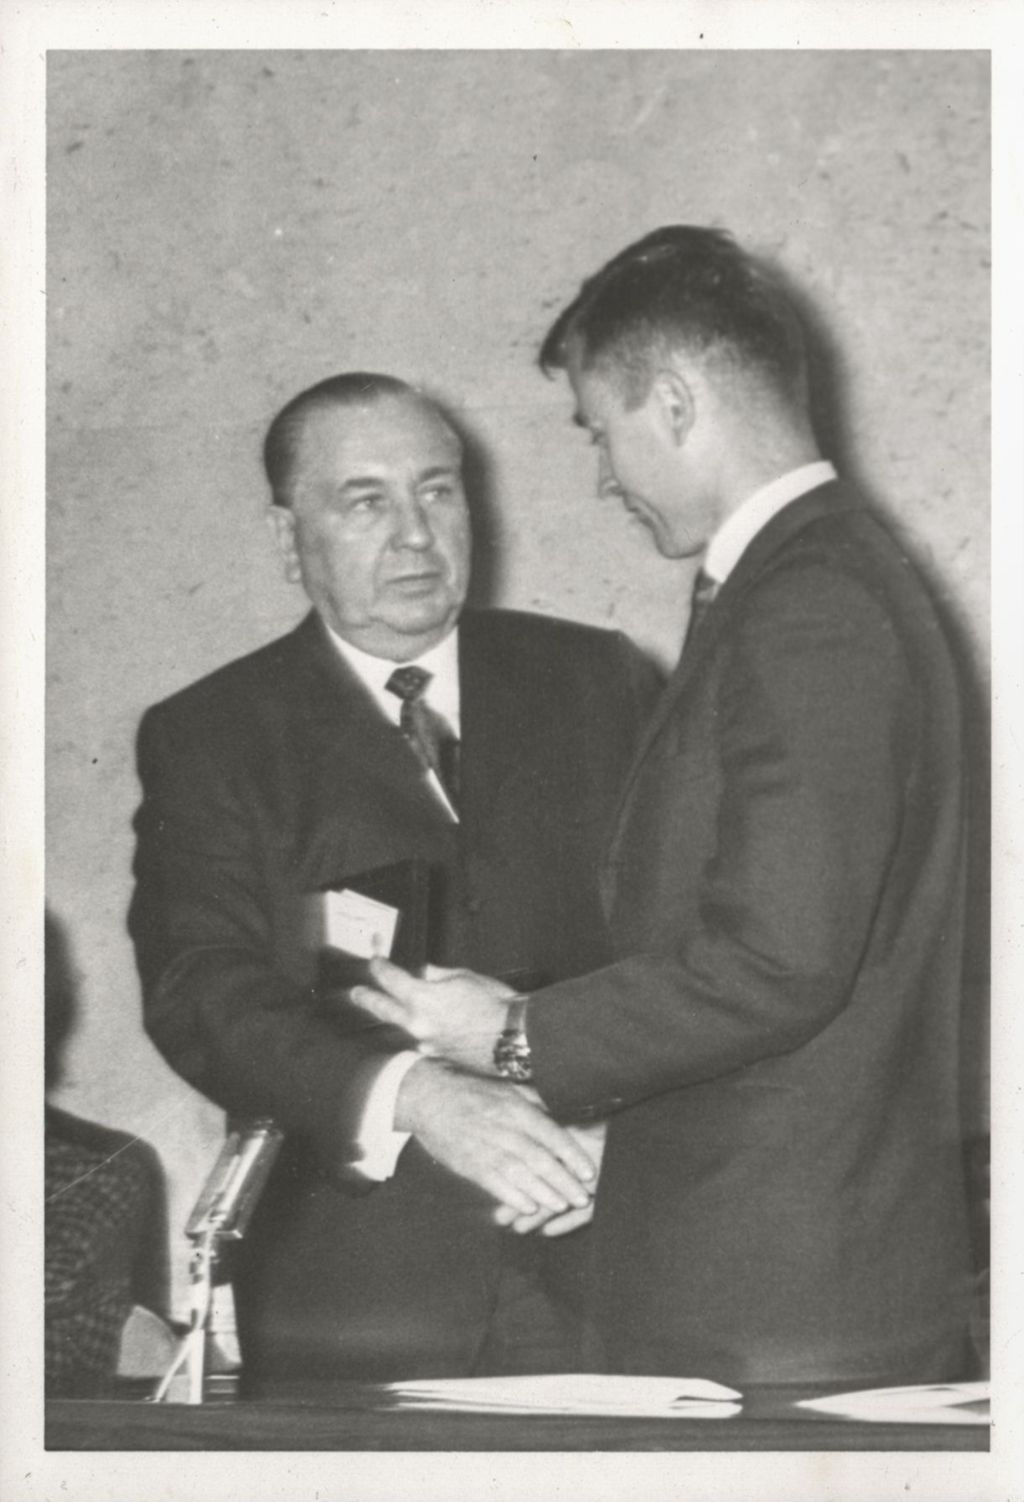 Richard J. Daley presents award to astronaut Young